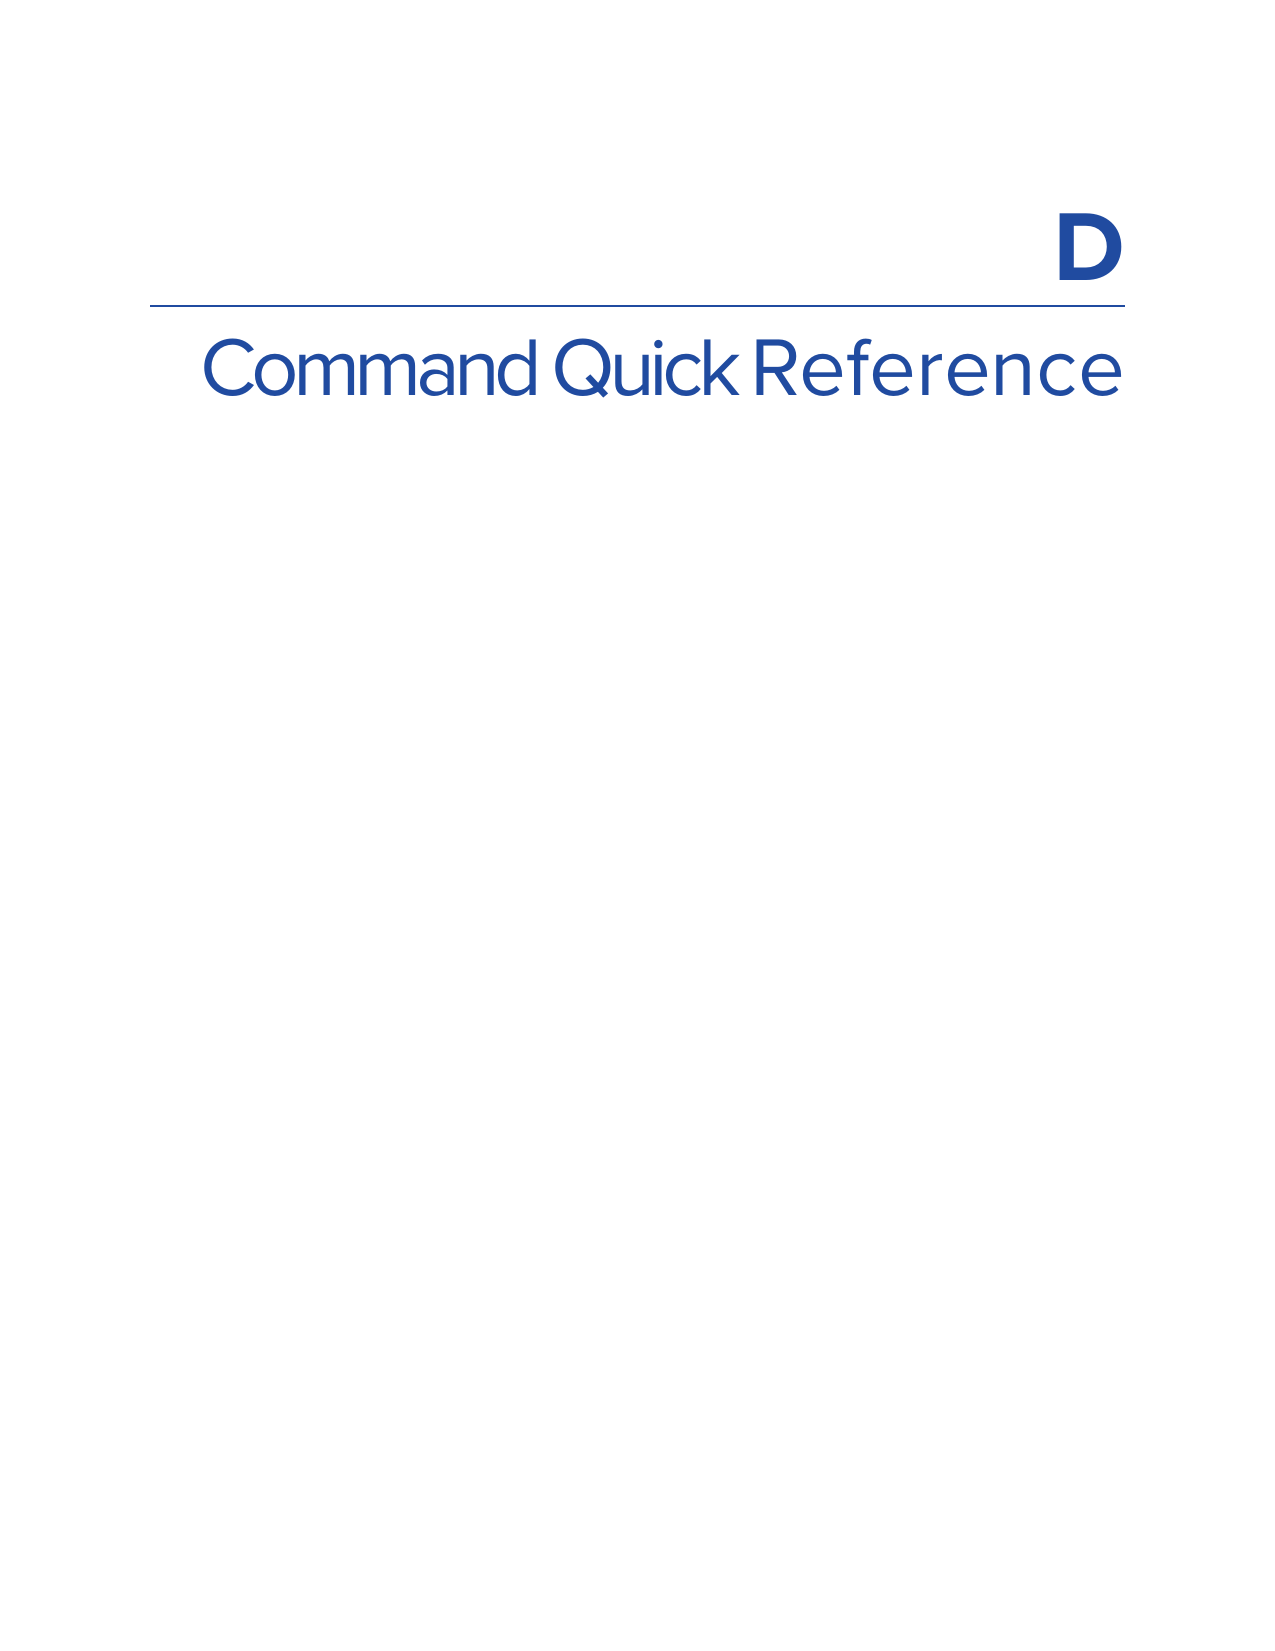 DCommand Quick Reference 